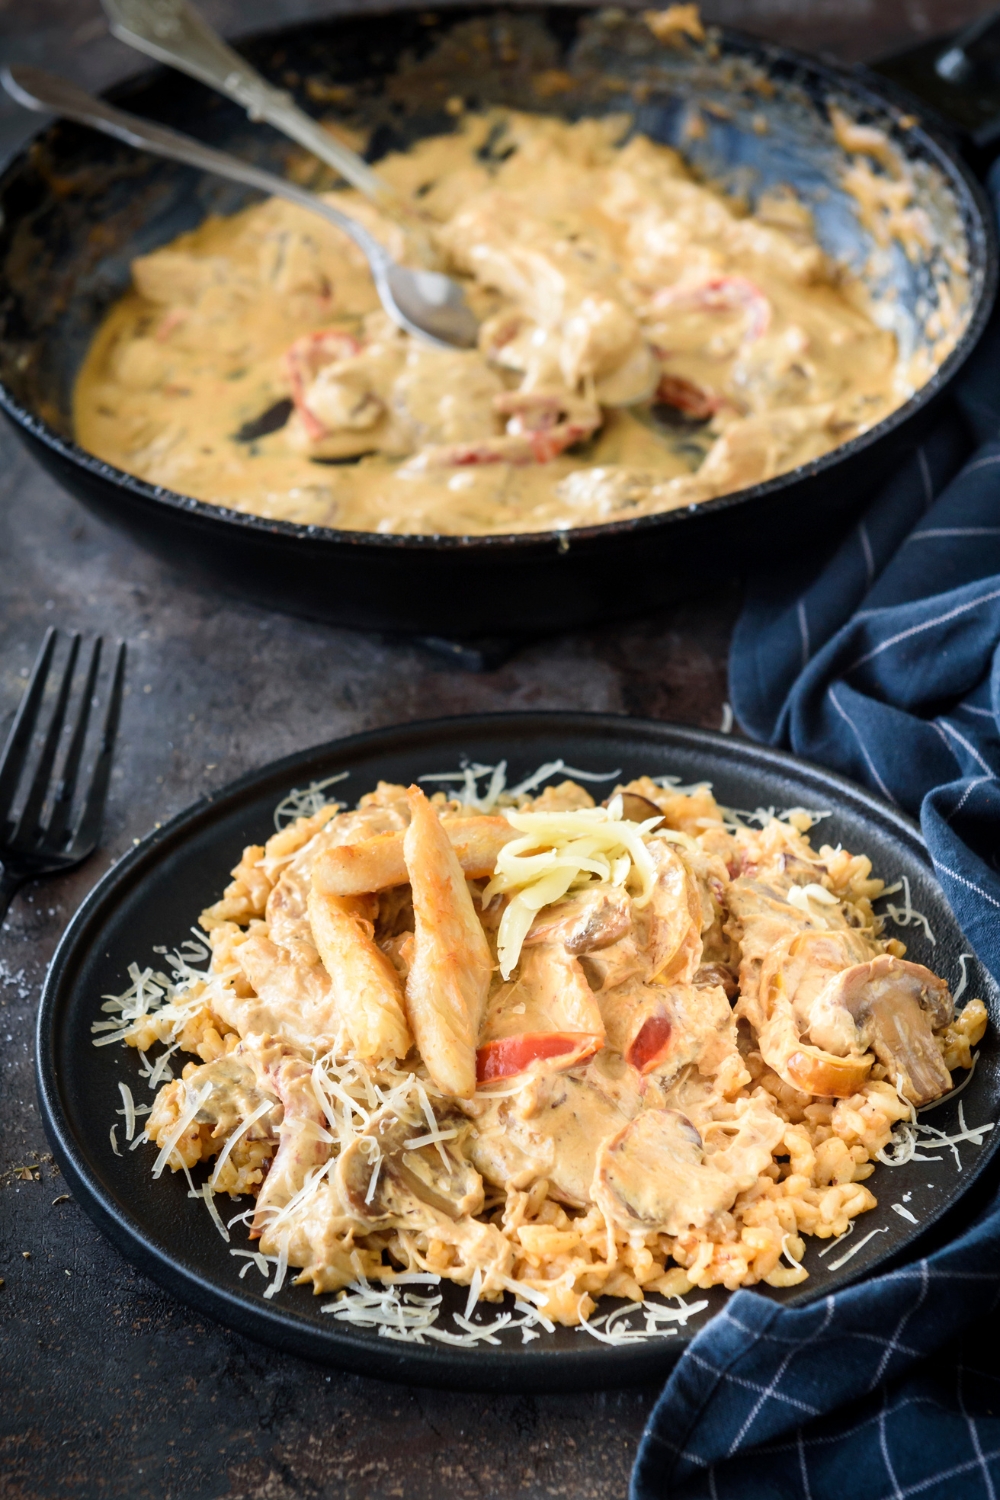 A plate of chicken in cream sauce with red peppers on a bed of rice next to a skillet filled with more chicken and peppers in a seasoned cream sauce.